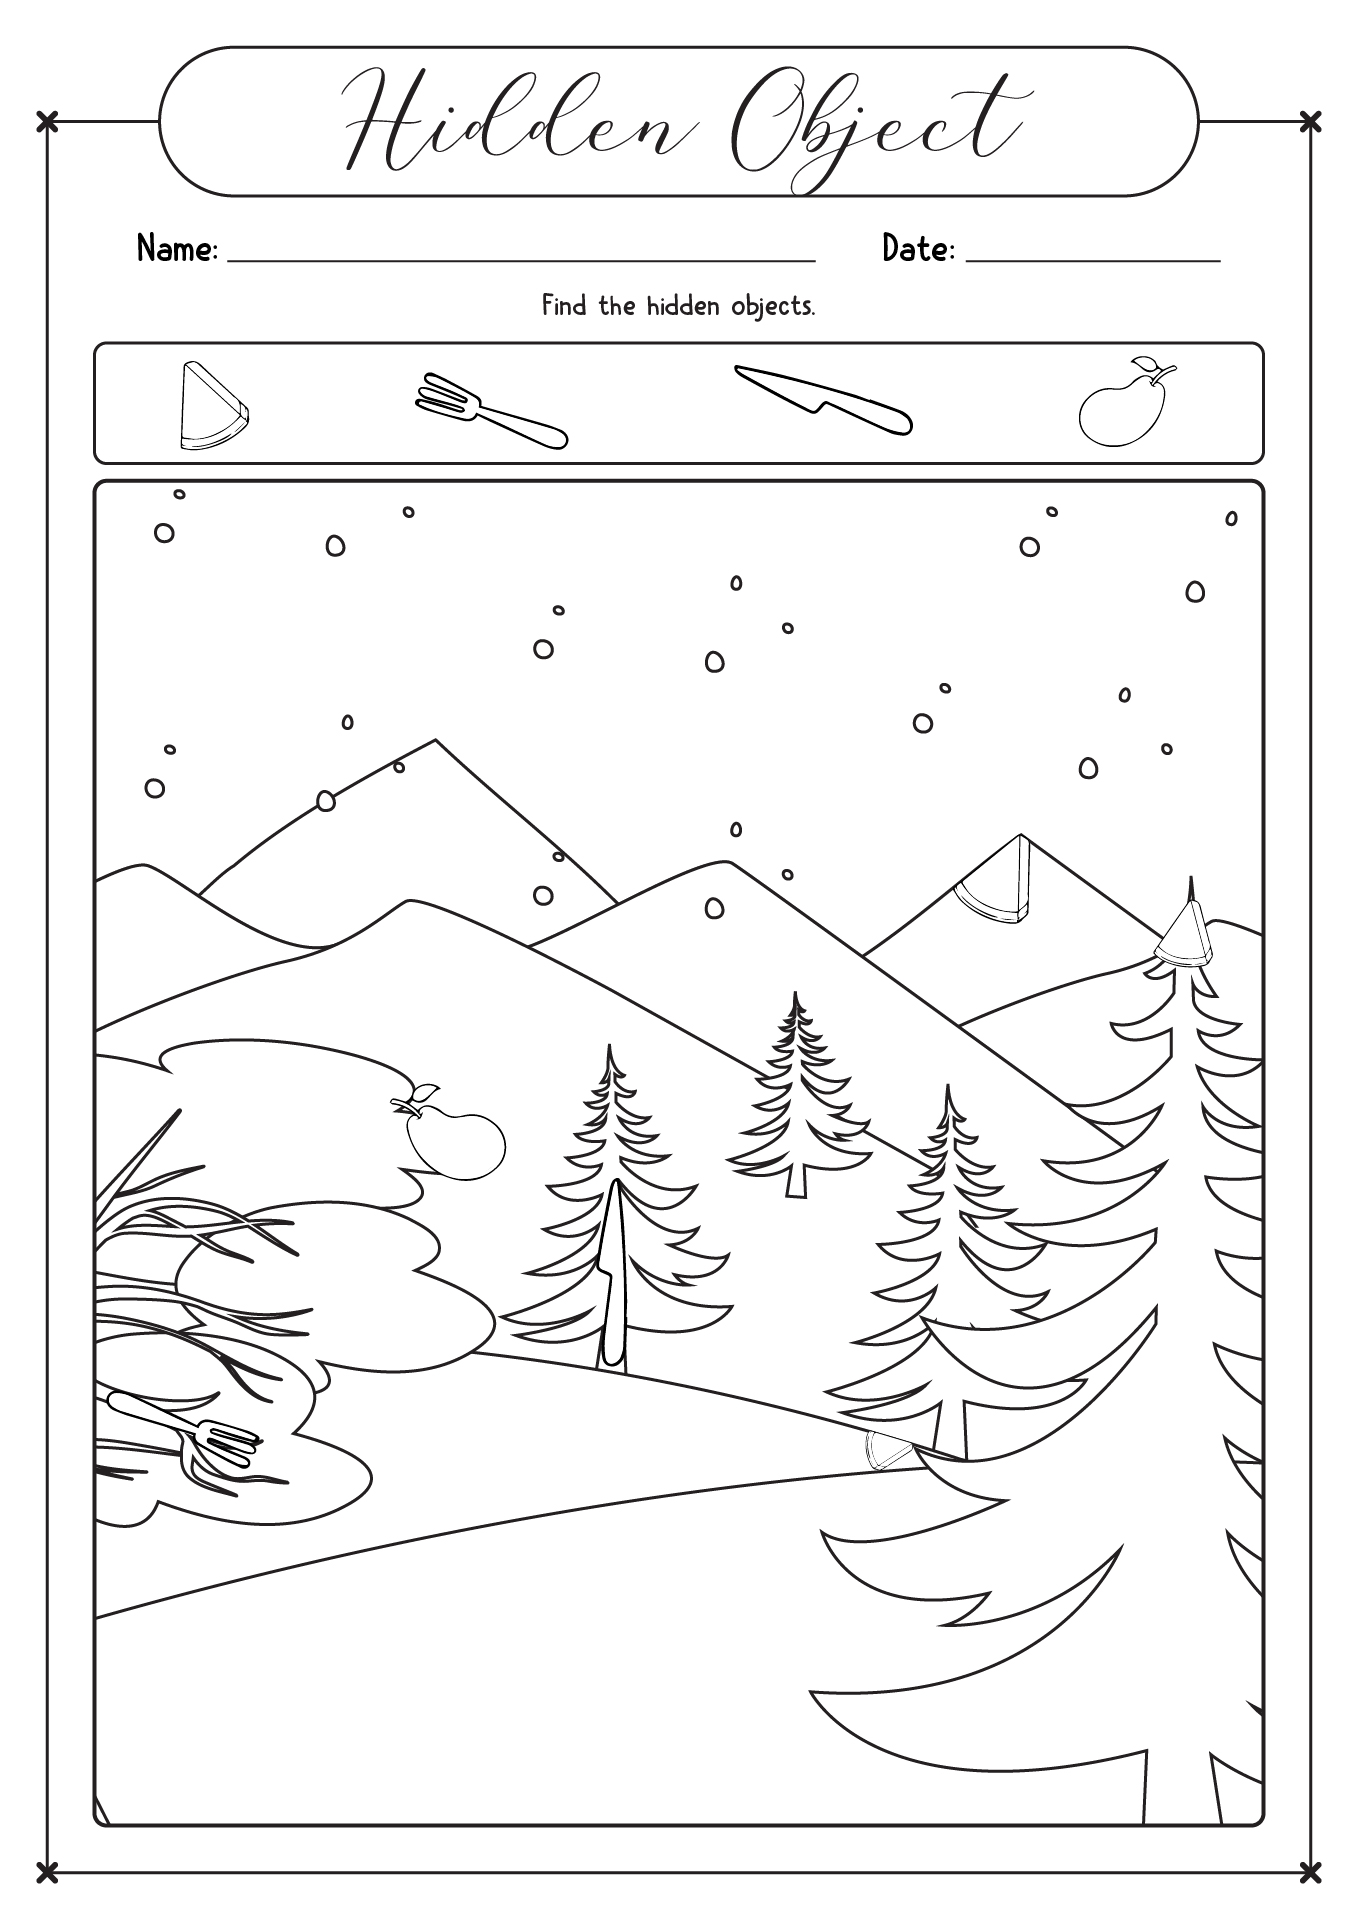 Winter Printable Hidden Object Puzzles